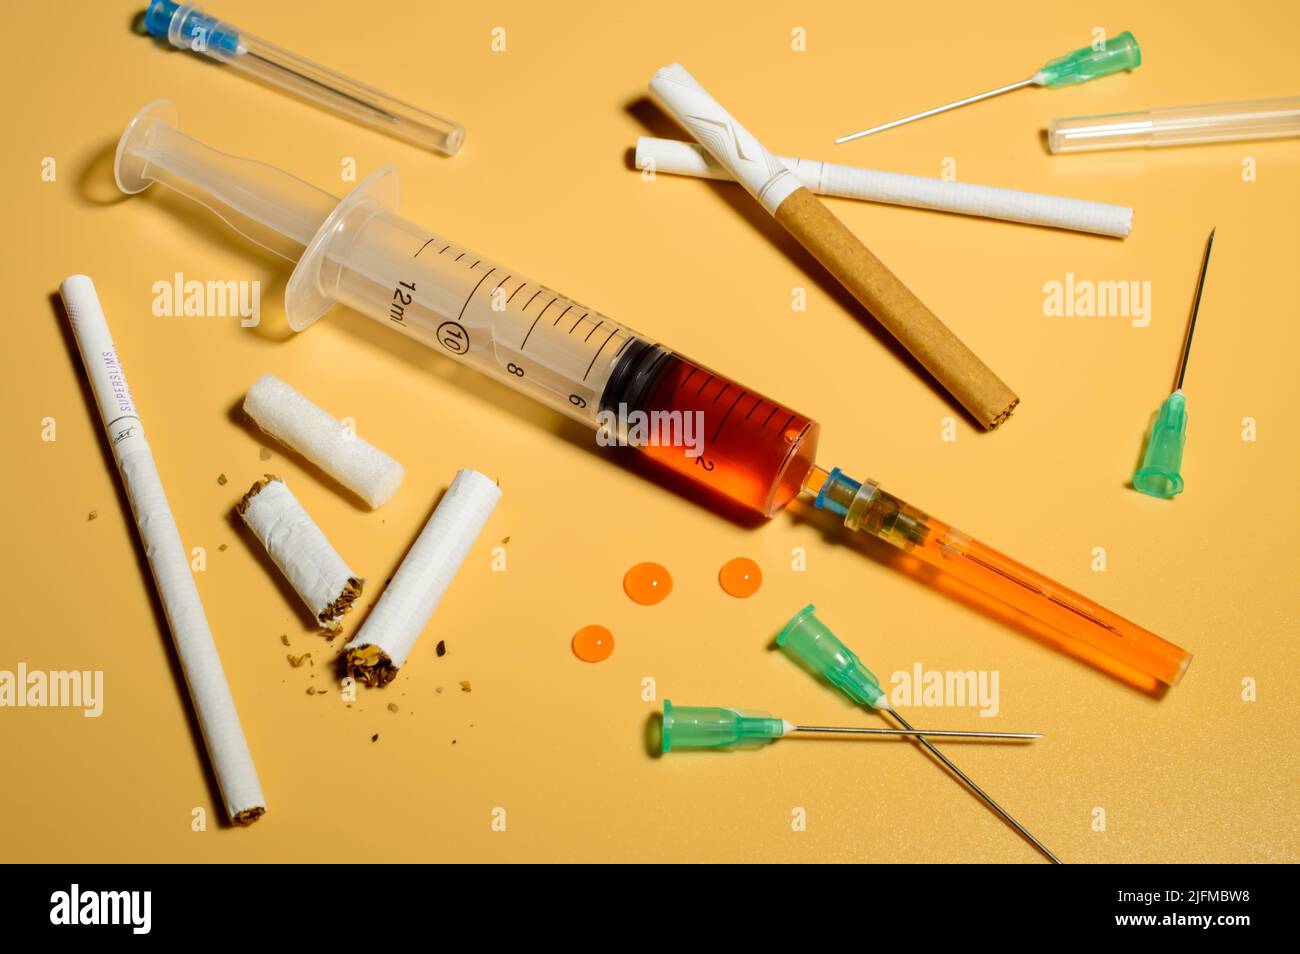 Social problems - compilation of cigarettes and syringe's needles. Syringe with the drug in the middle. Orange background. Stock Photo